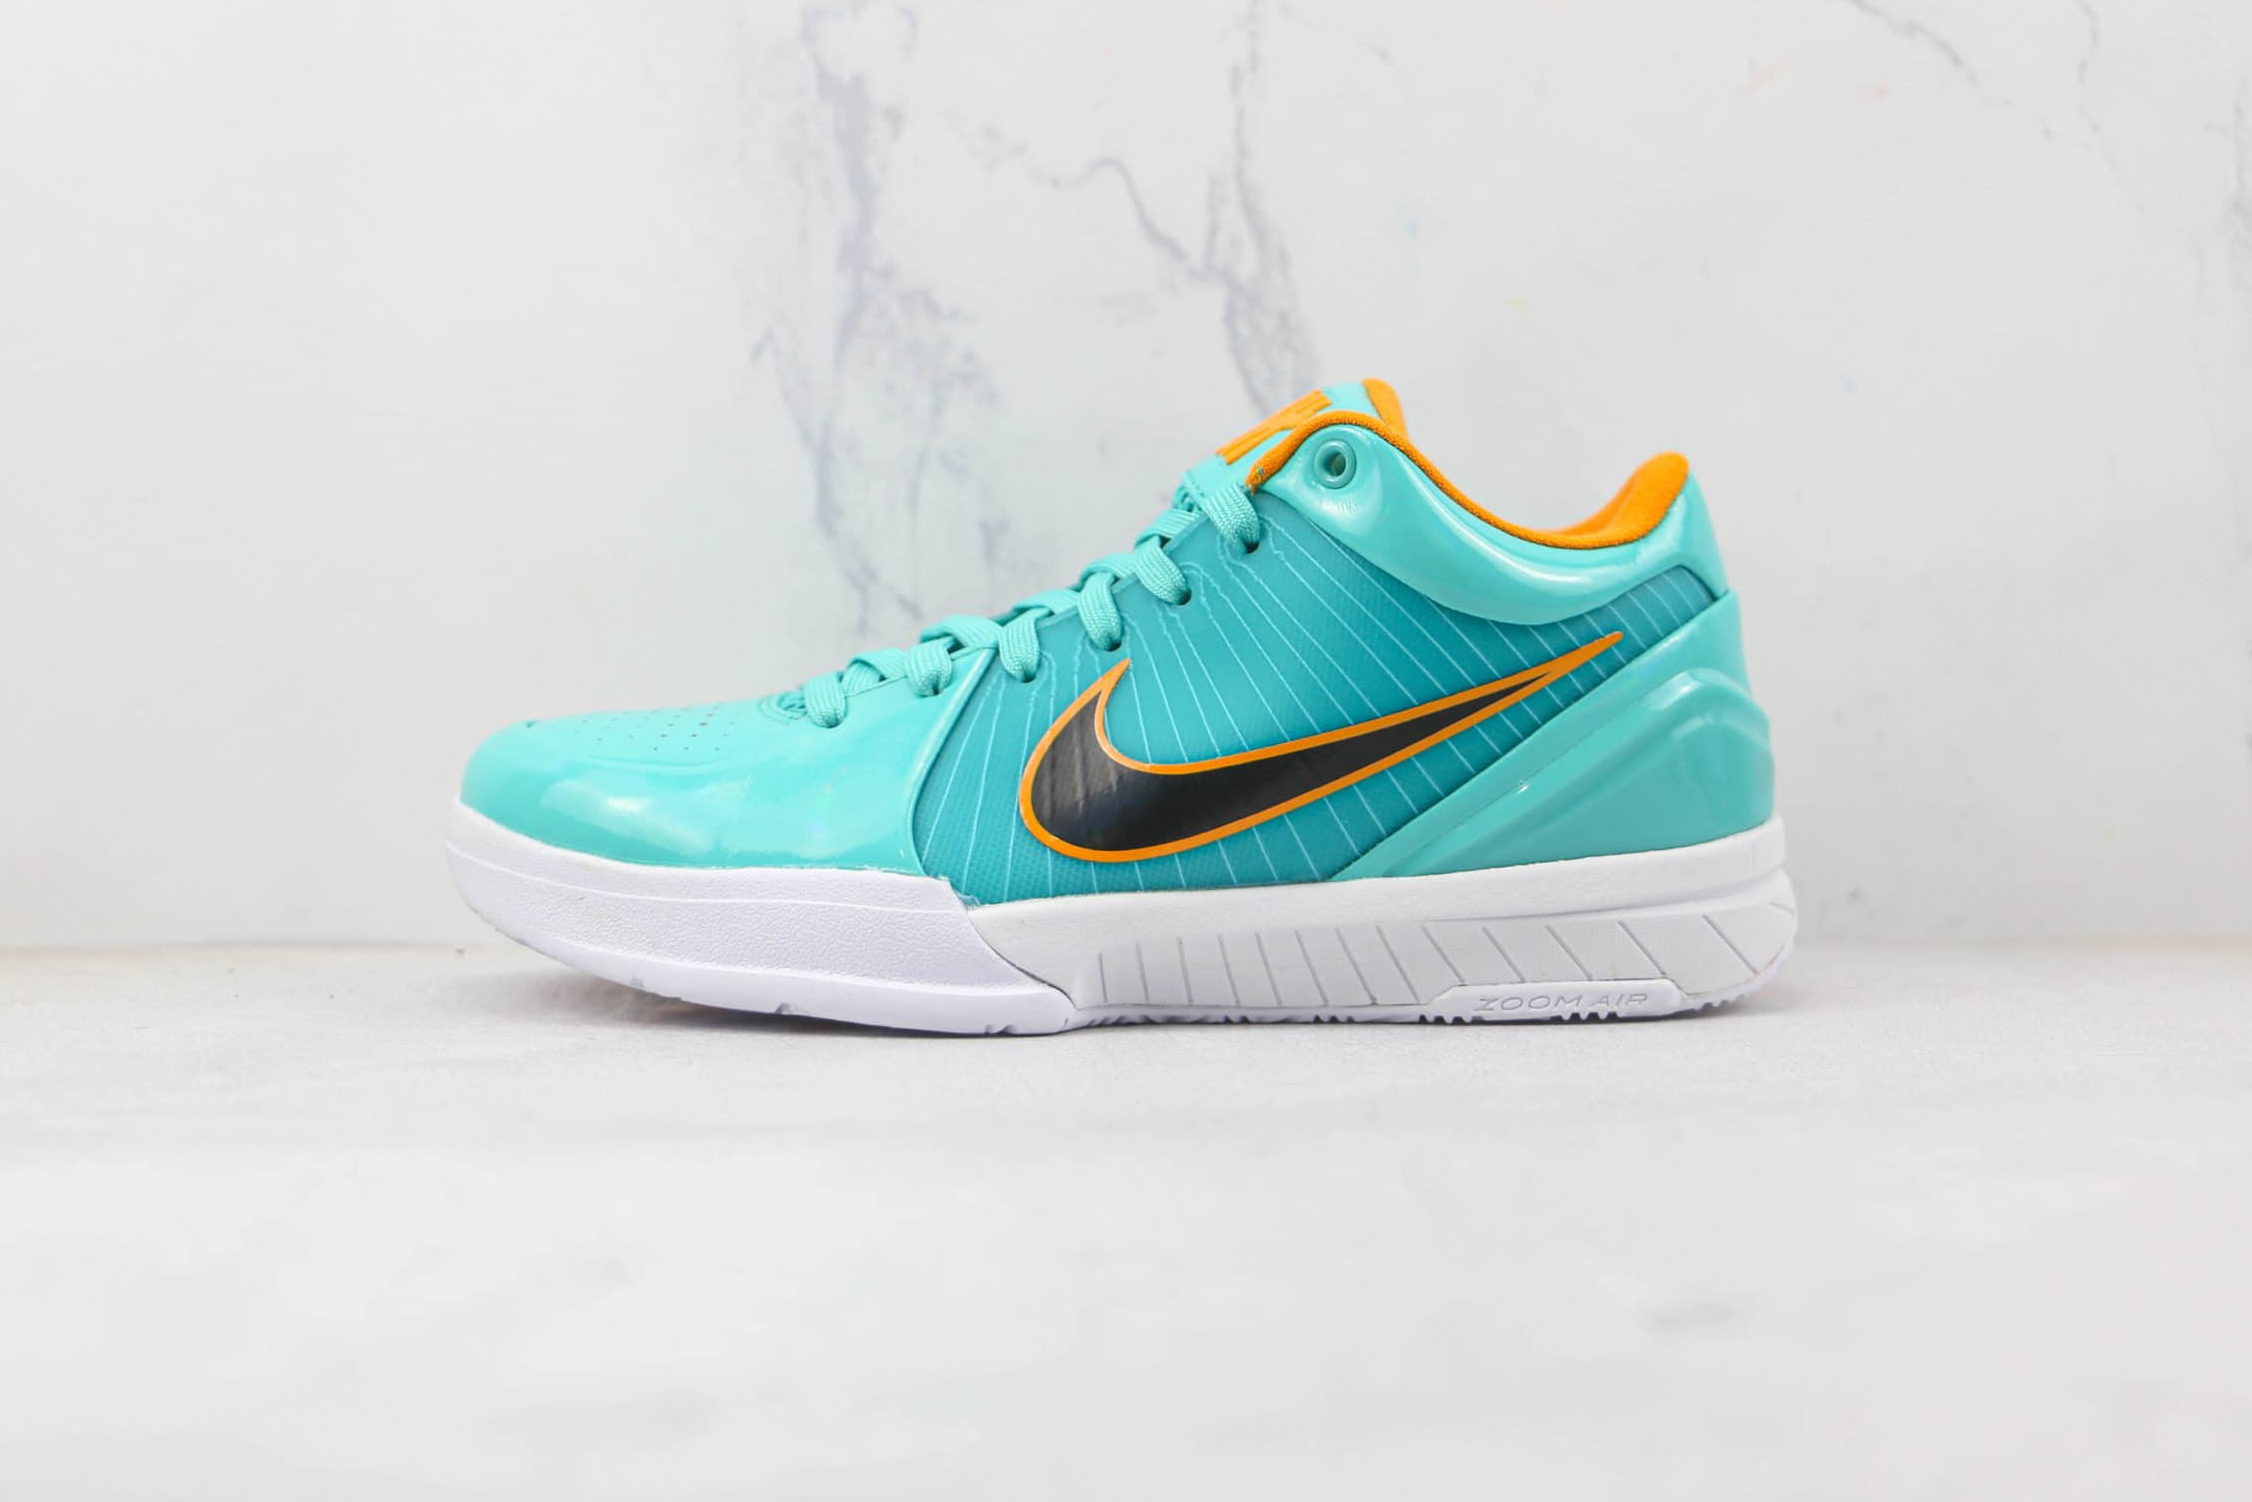 Nike Undefeated x Kobe 4 Protro 'Hyper Jade' CQ3869-300 - Exclusive Limited Edition